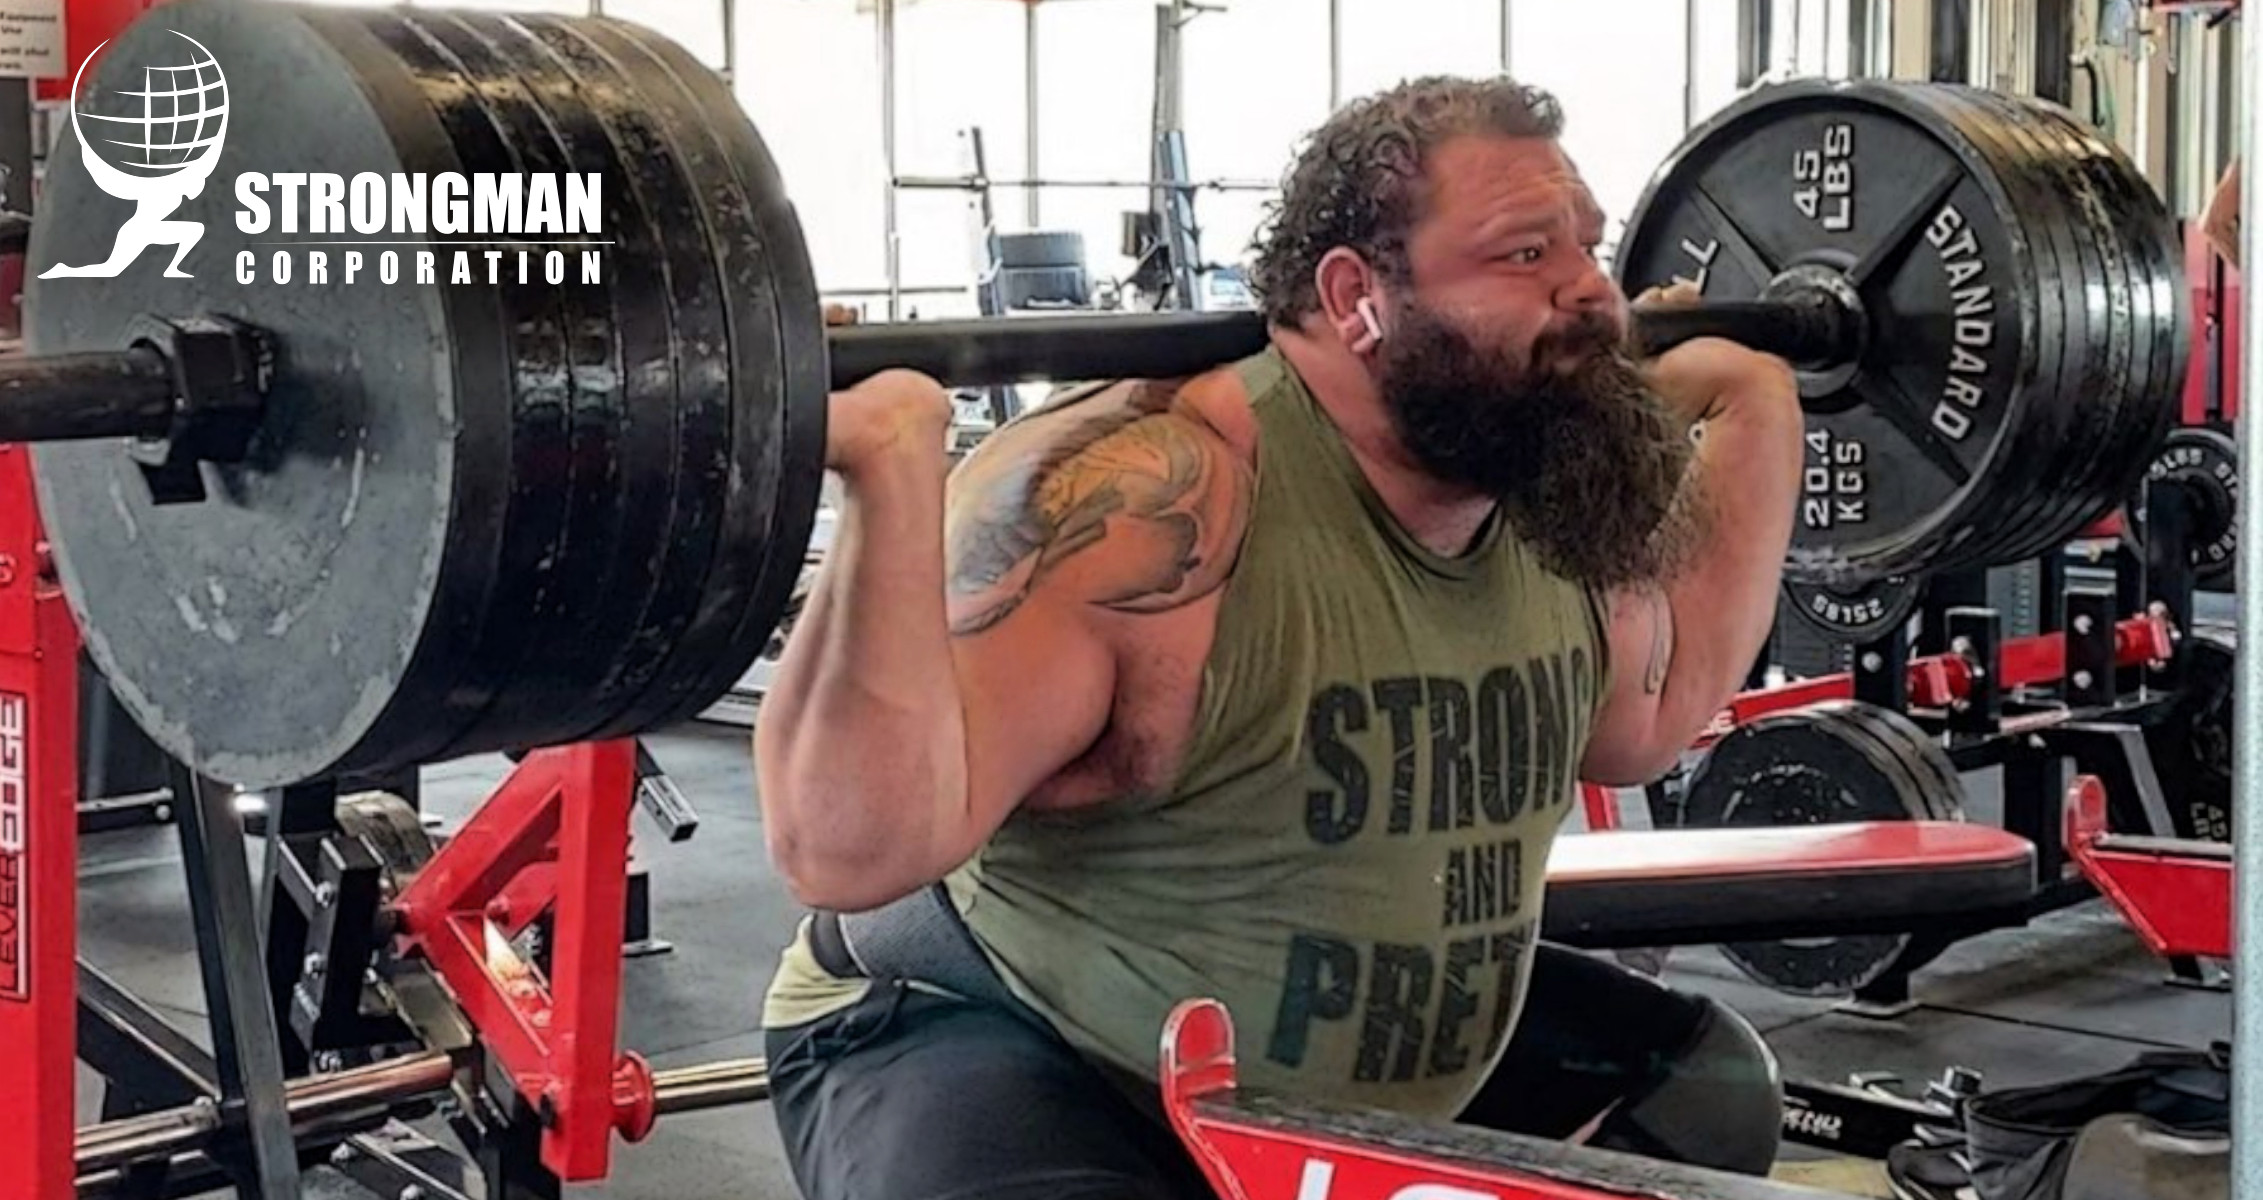 Robert Oberst Loses Weight, Looking Powerful Heading into World's